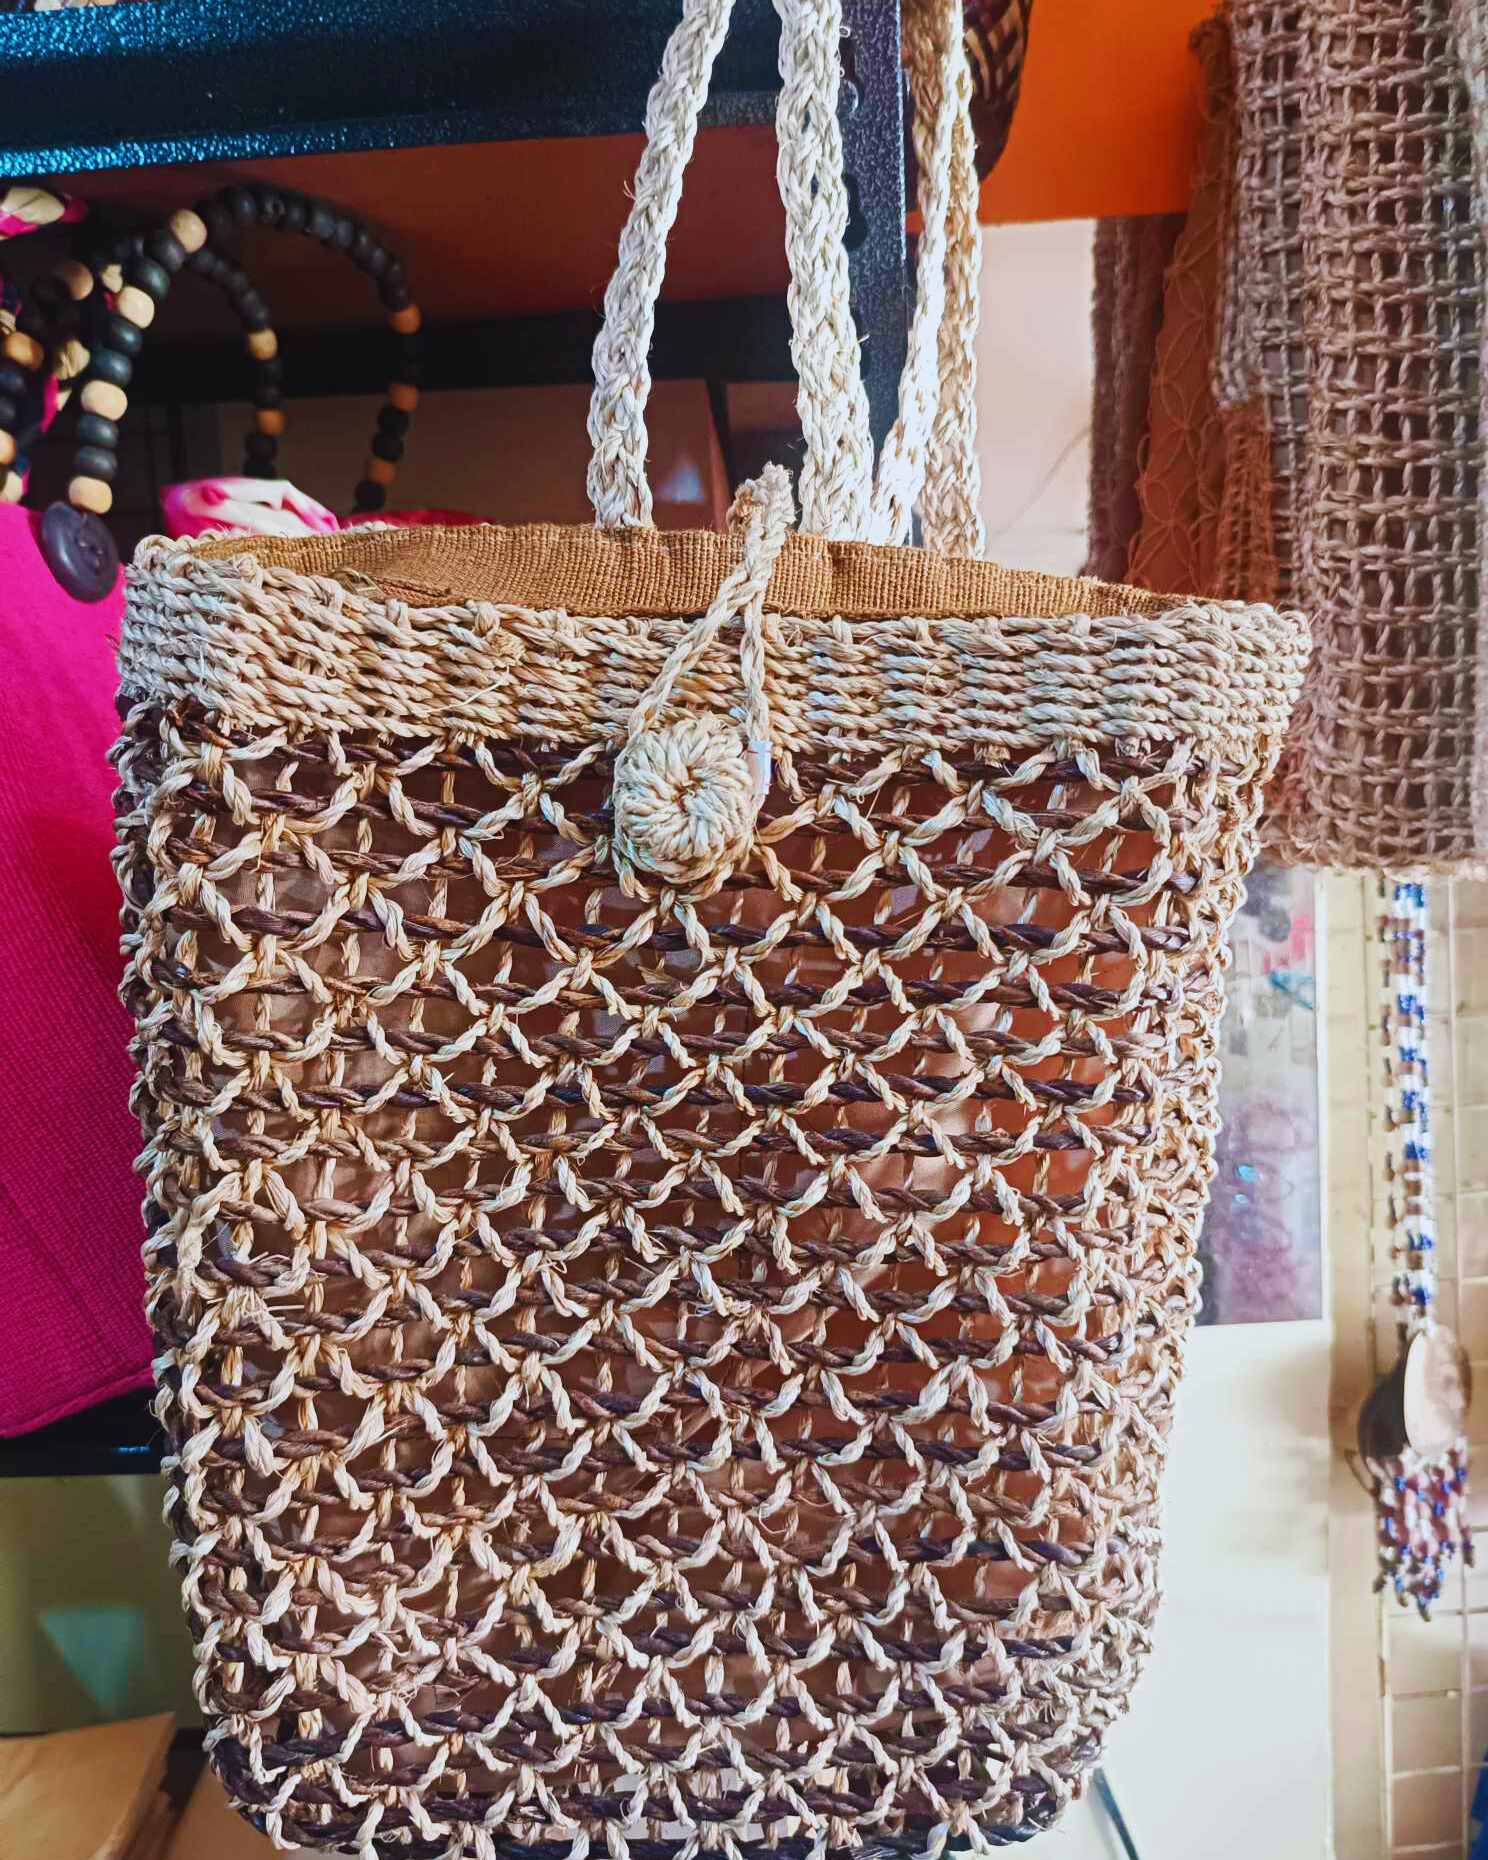 http://www.e-scs.shop/storage/photos/20/Products/Abaca Pack Bag.jpg